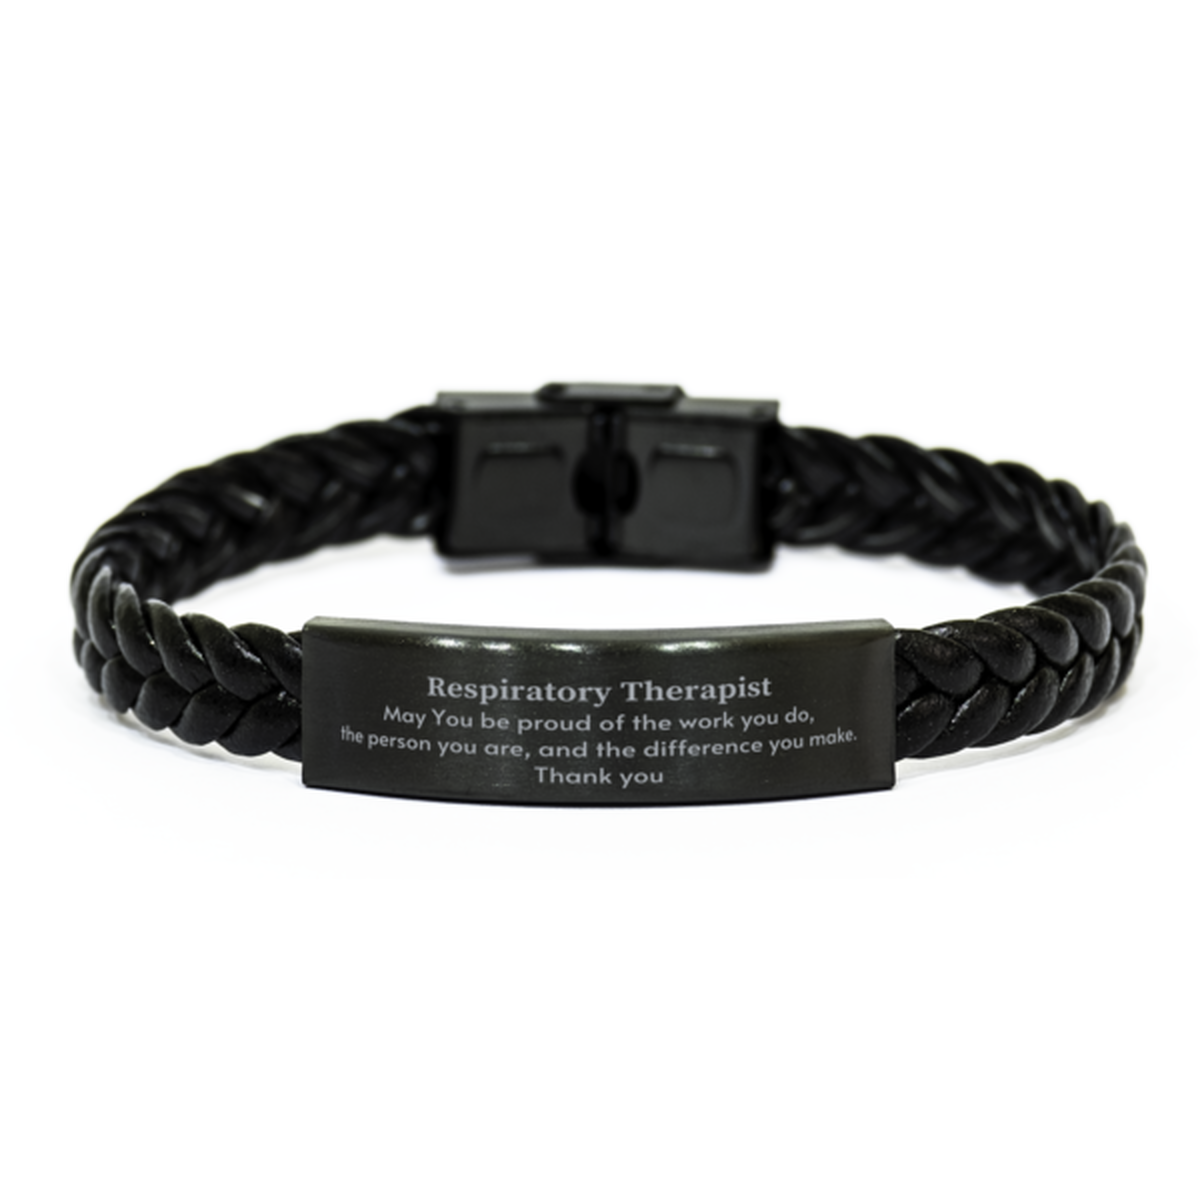 Heartwarming Braided Leather Bracelet Retirement Coworkers Gifts for Respiratory Therapist, Respiratory Therapist May You be proud of the work you do, the person you are Gifts for Boss Men Women Friends